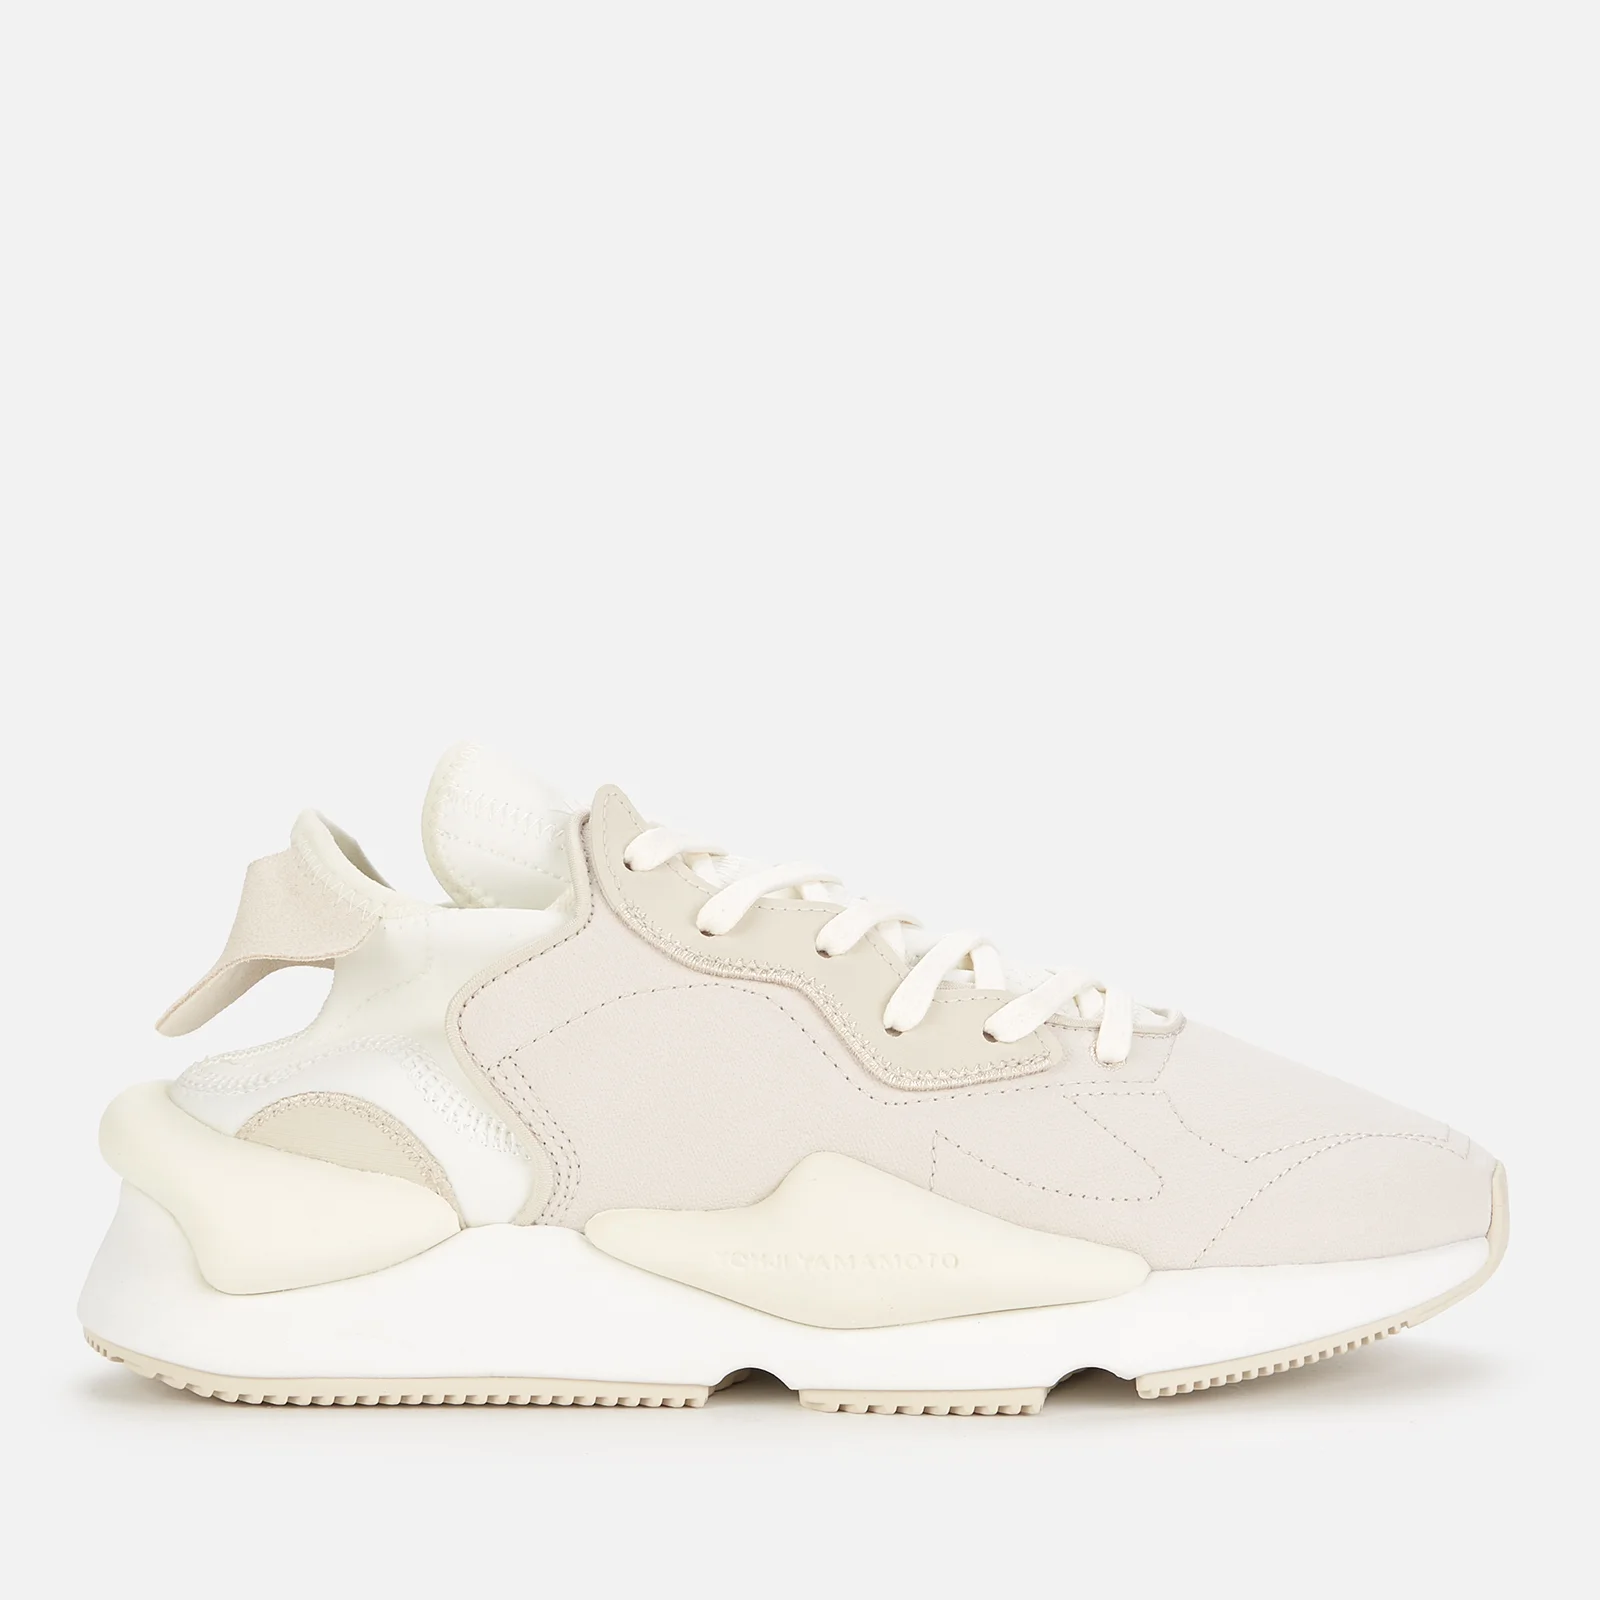 Y-3 Men's Kaiwa Trainers - Offwhite/Cleabrown/Core White Image 1